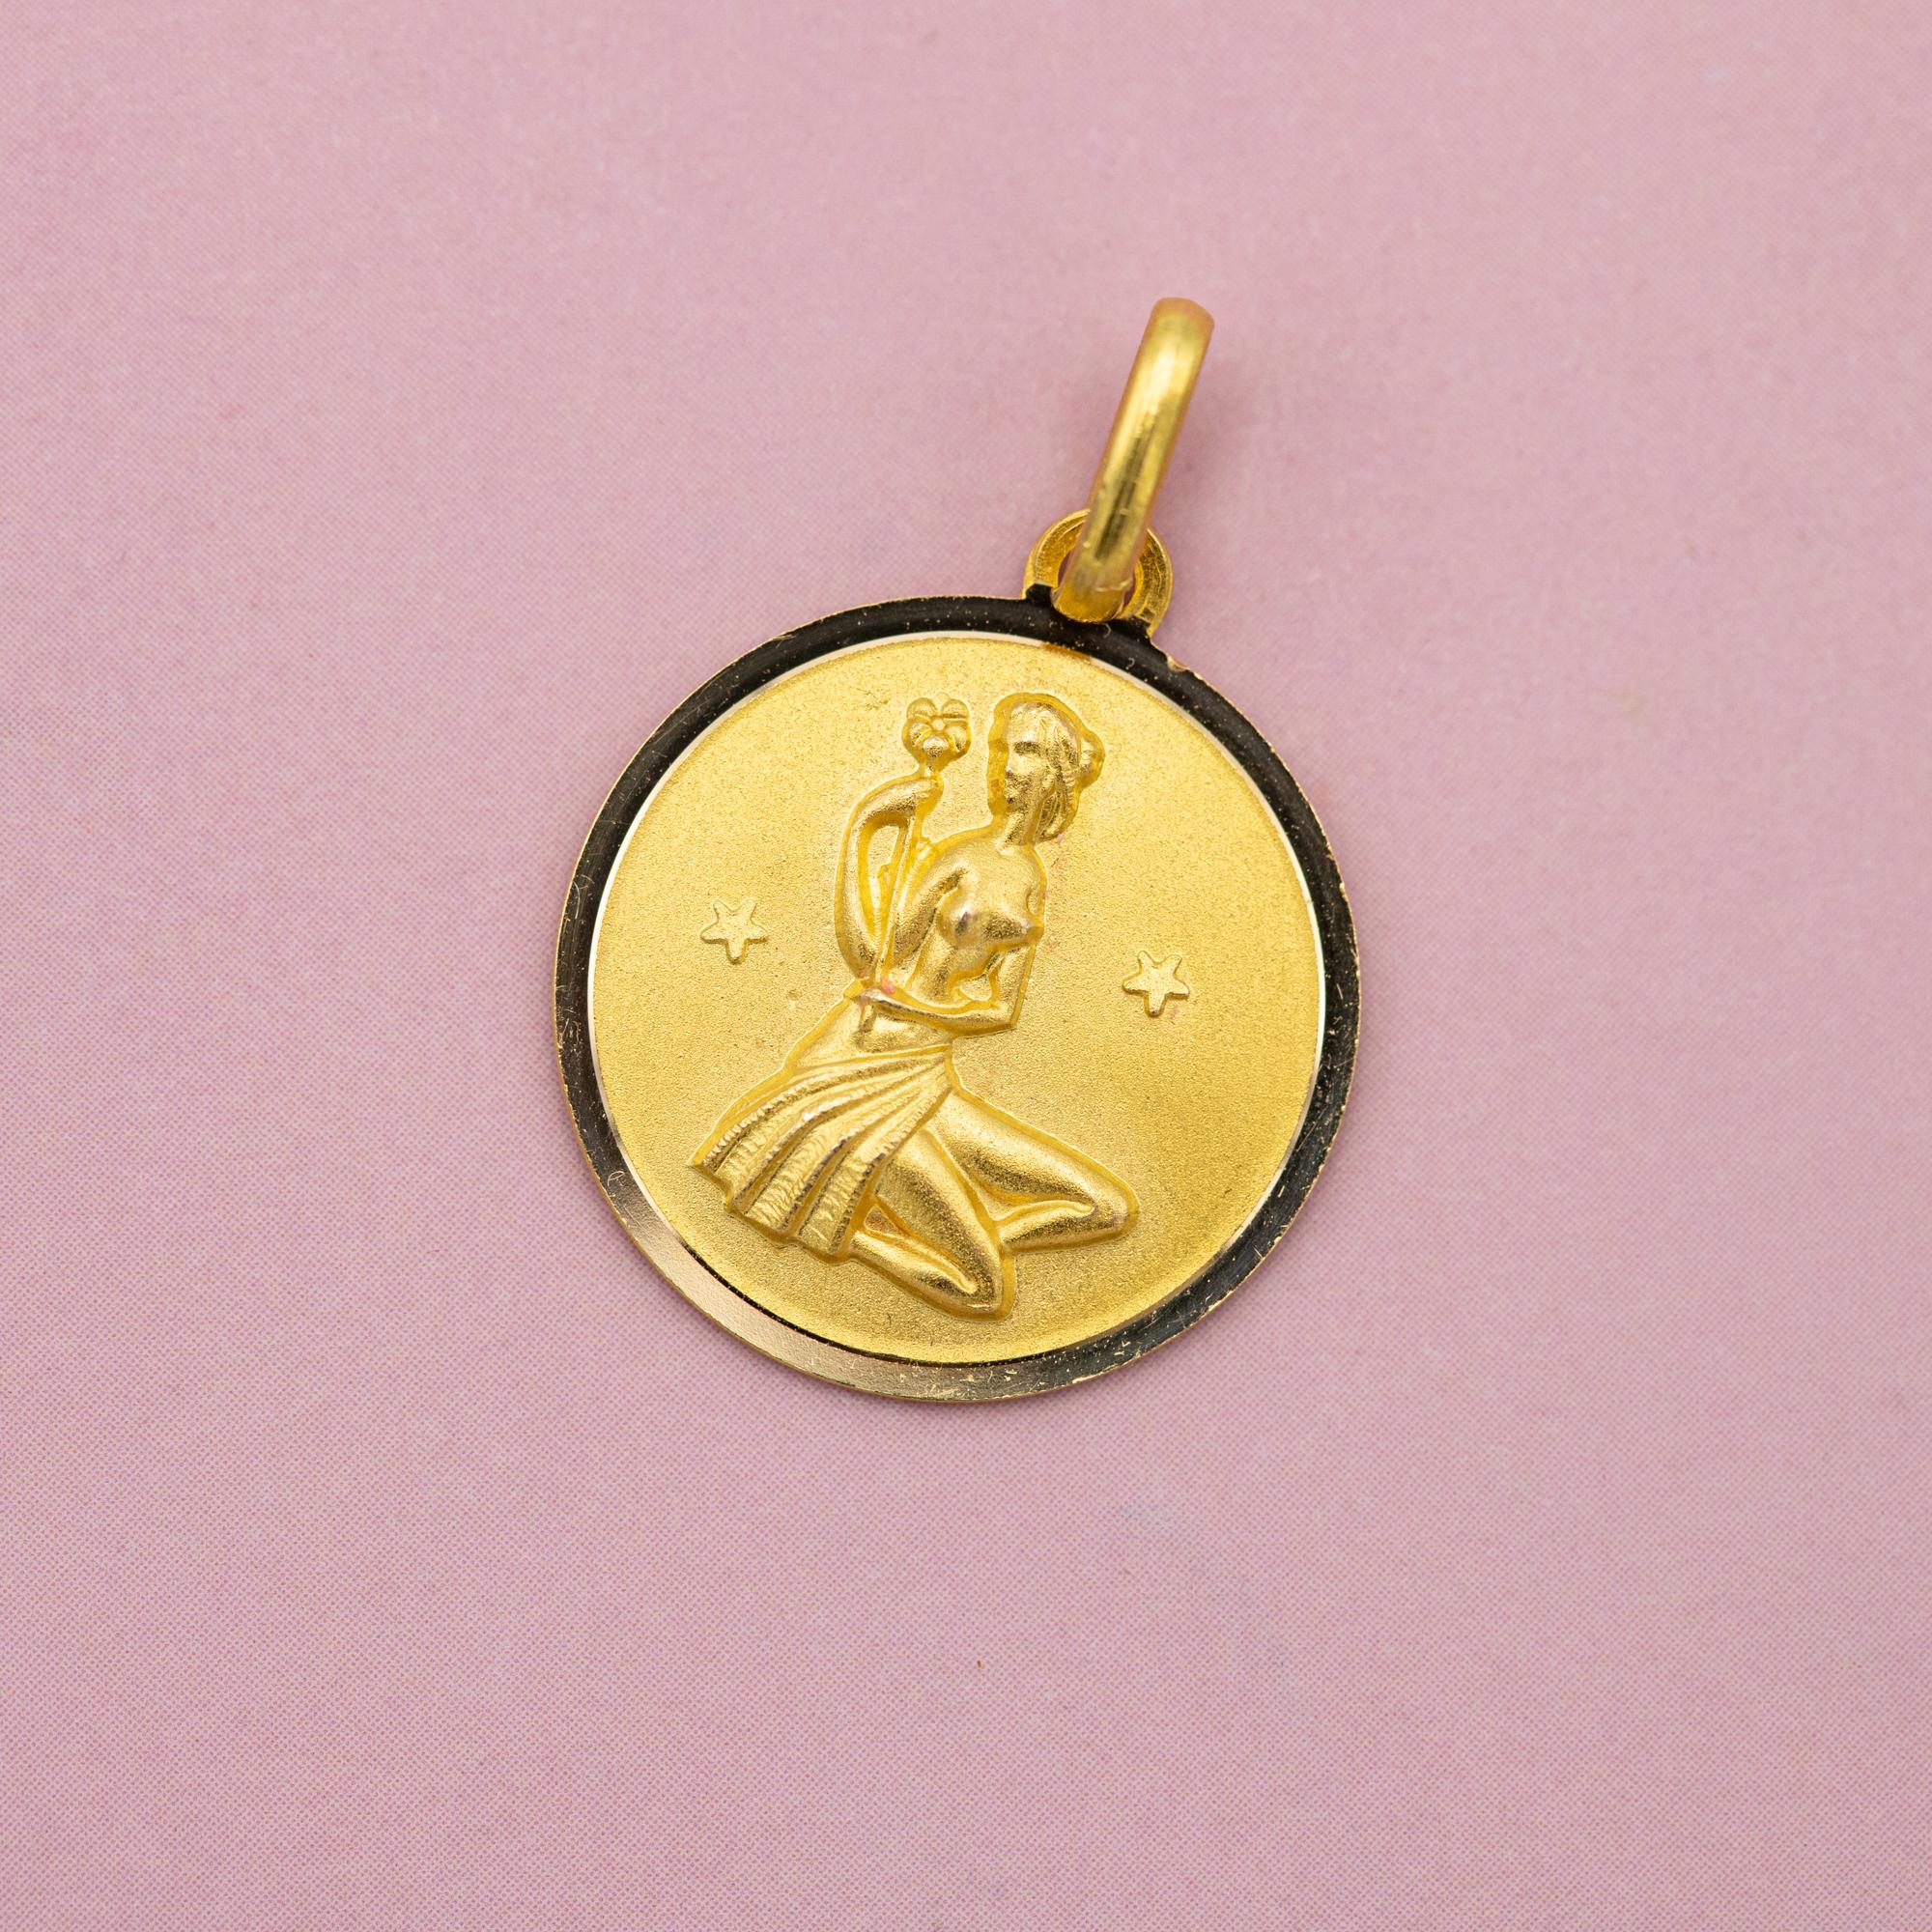 For sale is this vintage charm depicting Virgo, the sixth astrological sign in the zodiac. This Constellation Star Sign Pendant is associated with the birth dates between 23 August and 23 September. This 18 ct gold charm is marked with a 750 mark.